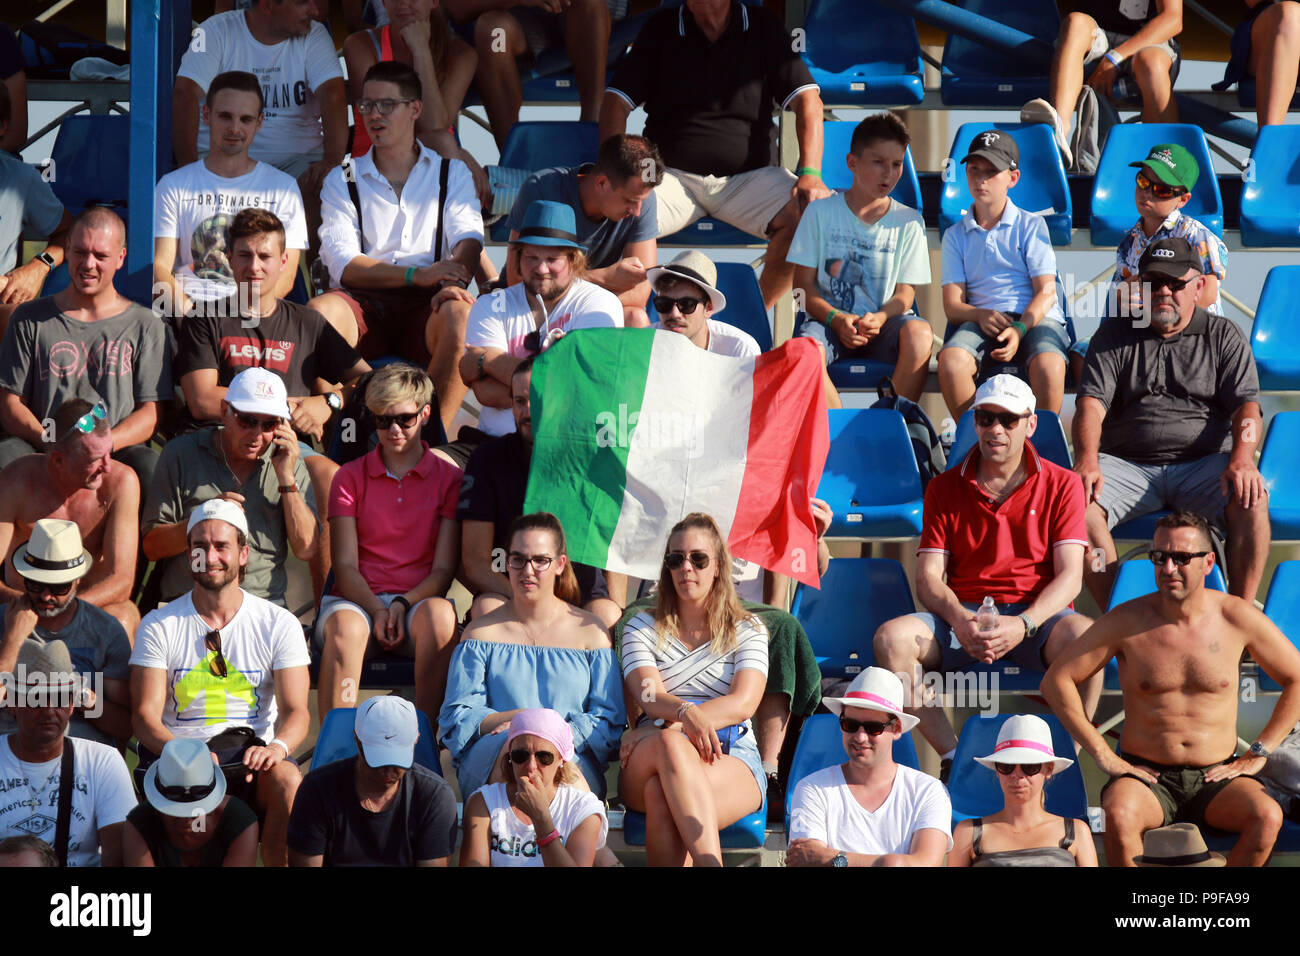 Umag, Croatia. 18th July 2018. CROATIA, Umag: Marco Cecchinato of Italy fans during the singles match Vesely v Cecchinato at the ATP 29th Plava laguna Croatia Open Umag tournament at the at the Goran Ivanisevic ATP Stadium, on July 18, 2018 in Umag. Credit: Andrea Spinelli/Alamy Live News Stock Photo